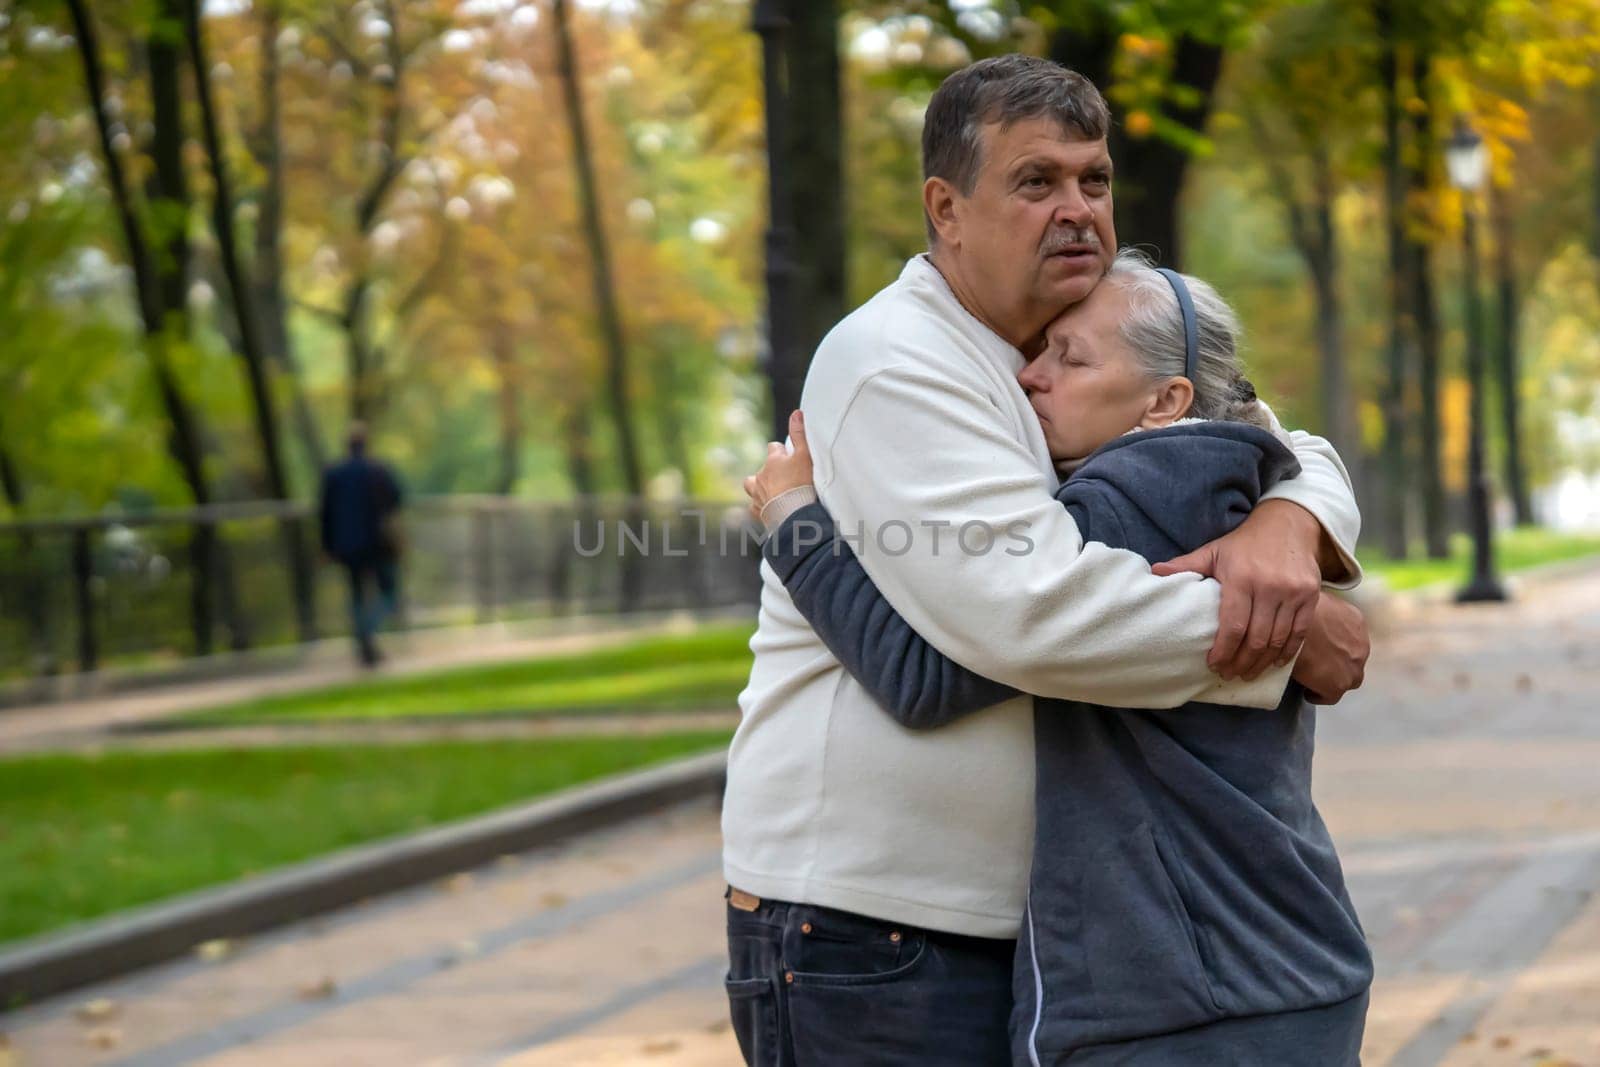 An elderly couple hugs in a park on a walk, a husband hugs his wife tightly and tenderly, supports her during her treatment against disease, a caring man and woman help each other in difficult times.